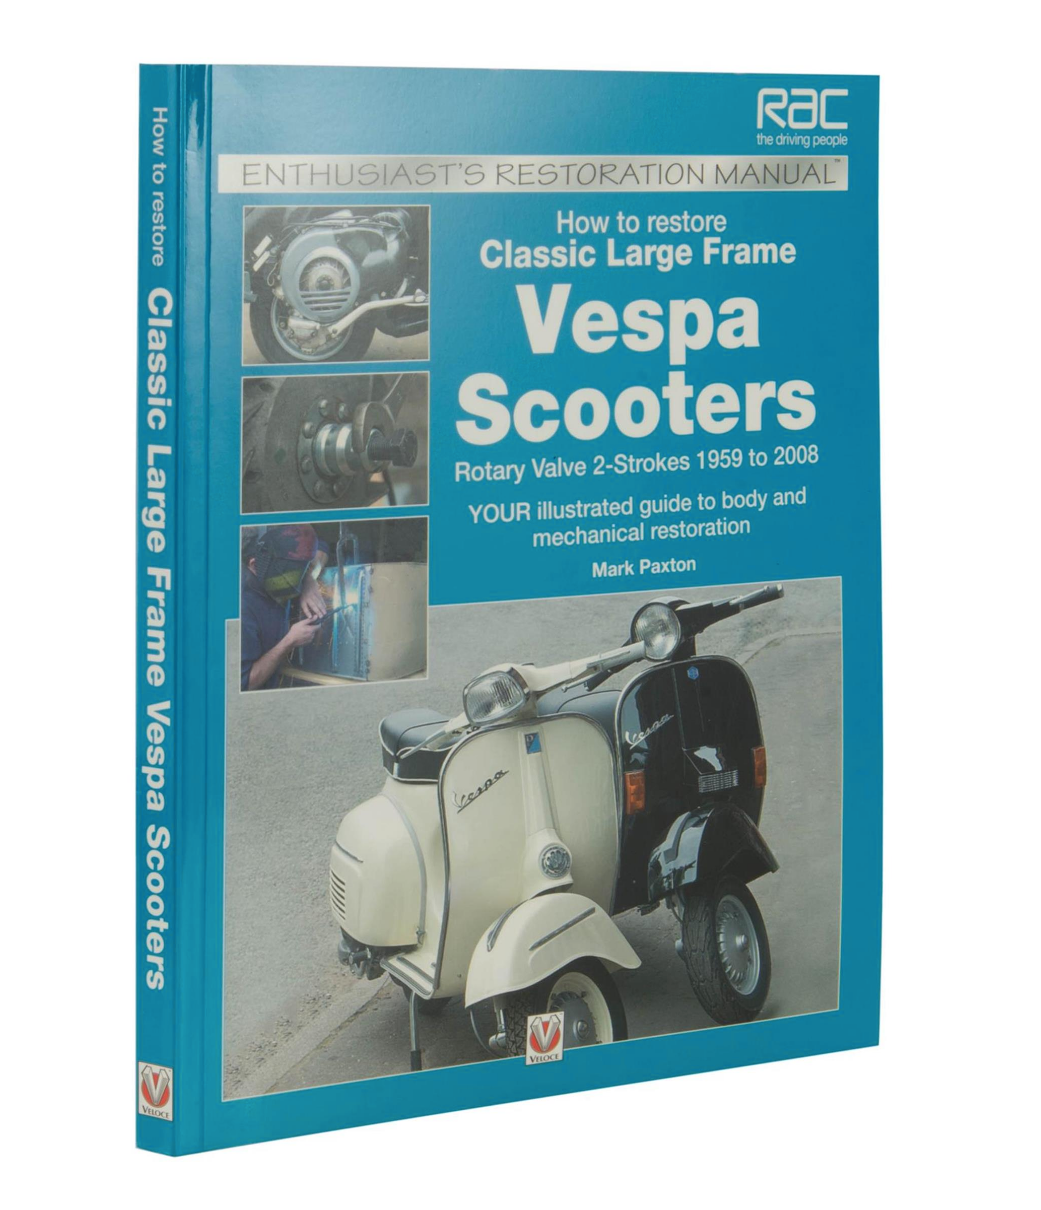 Manual - How To Restore Classic Large Frame Vespa Scooters 1959-2008